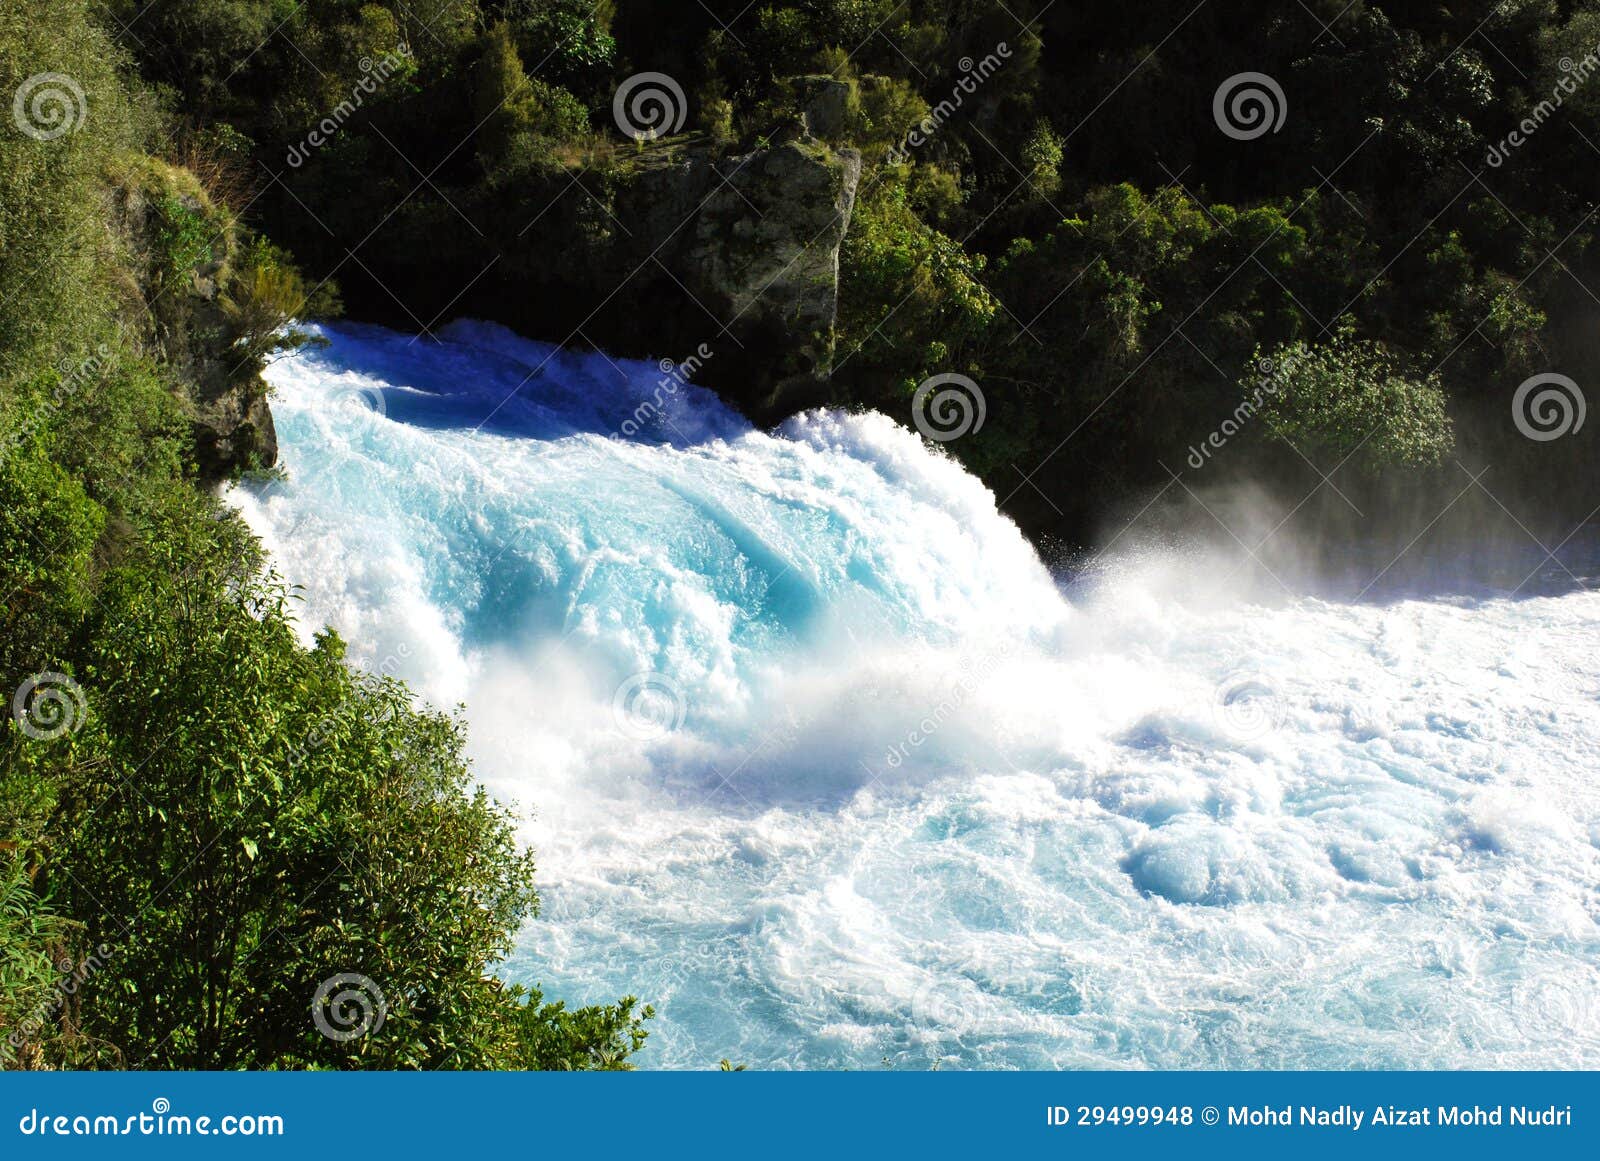 Huka Falls, New Zealand. Taupo, New Zealand - July 26th: View of Huka Falls which is located at Taupo, New Zealand on 26 July 2009. Massive discharge of waters from Waikato River passed through this waterfalls.